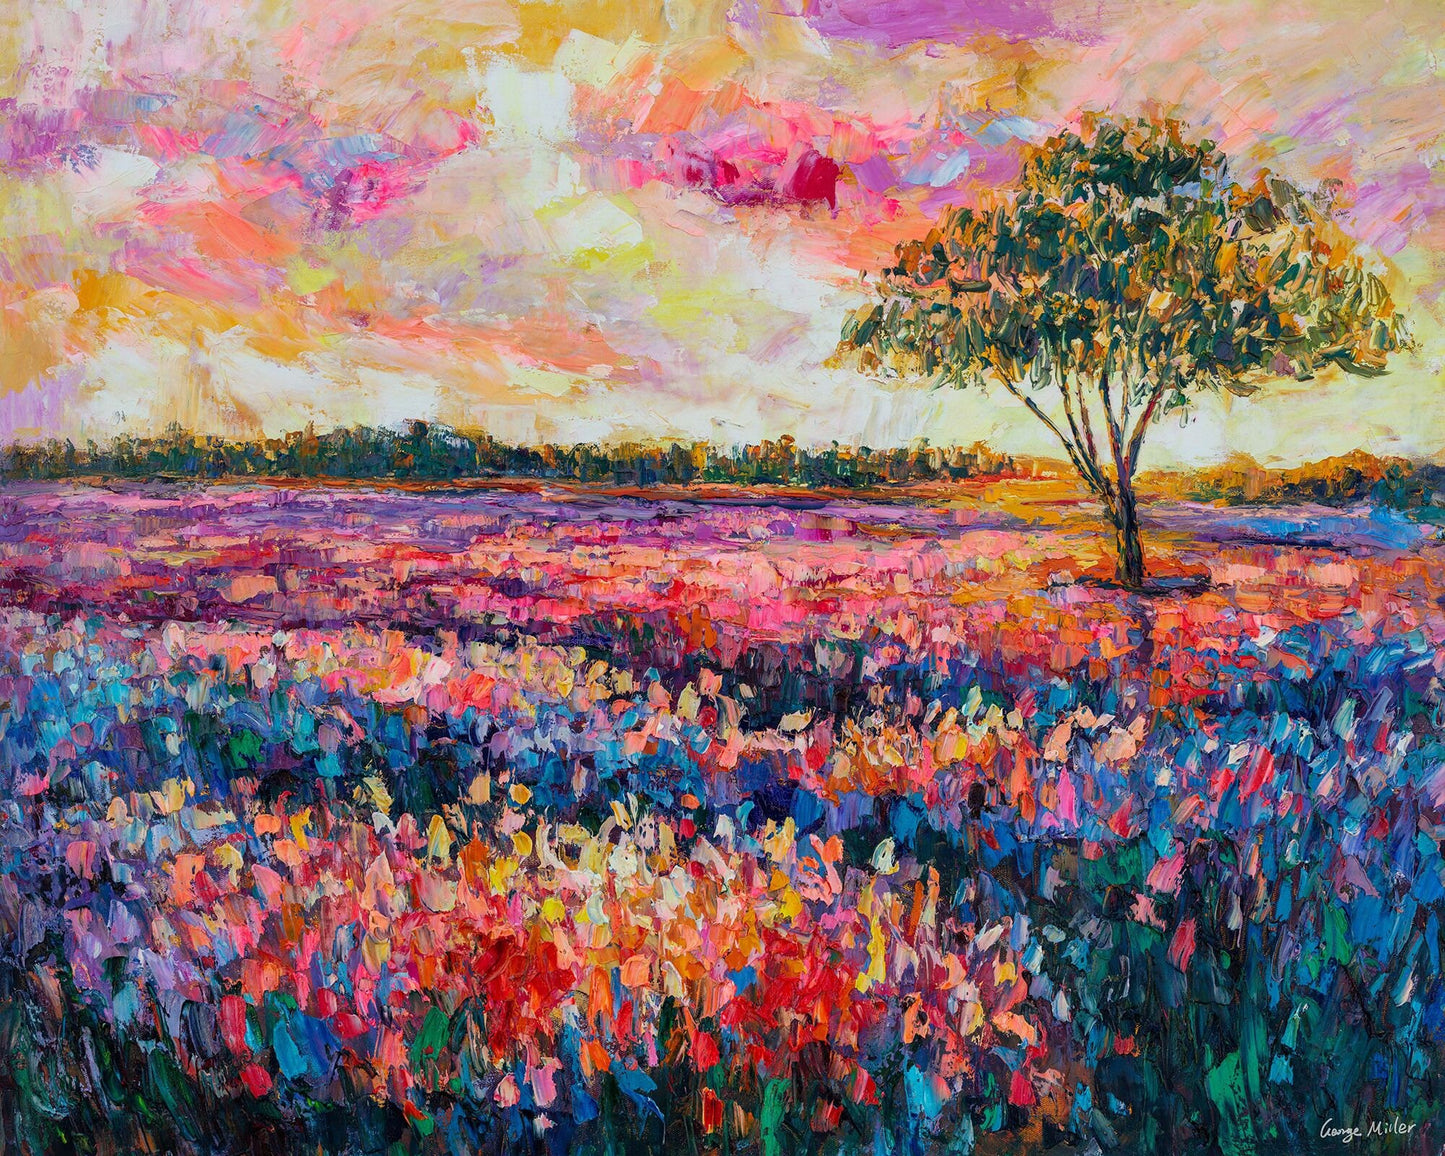 Oil Painting, Landscape Painting, French Mediterranean Lavender Field Dawn, Original Landscape Oil Paintings, Large Painting, Palette Knife